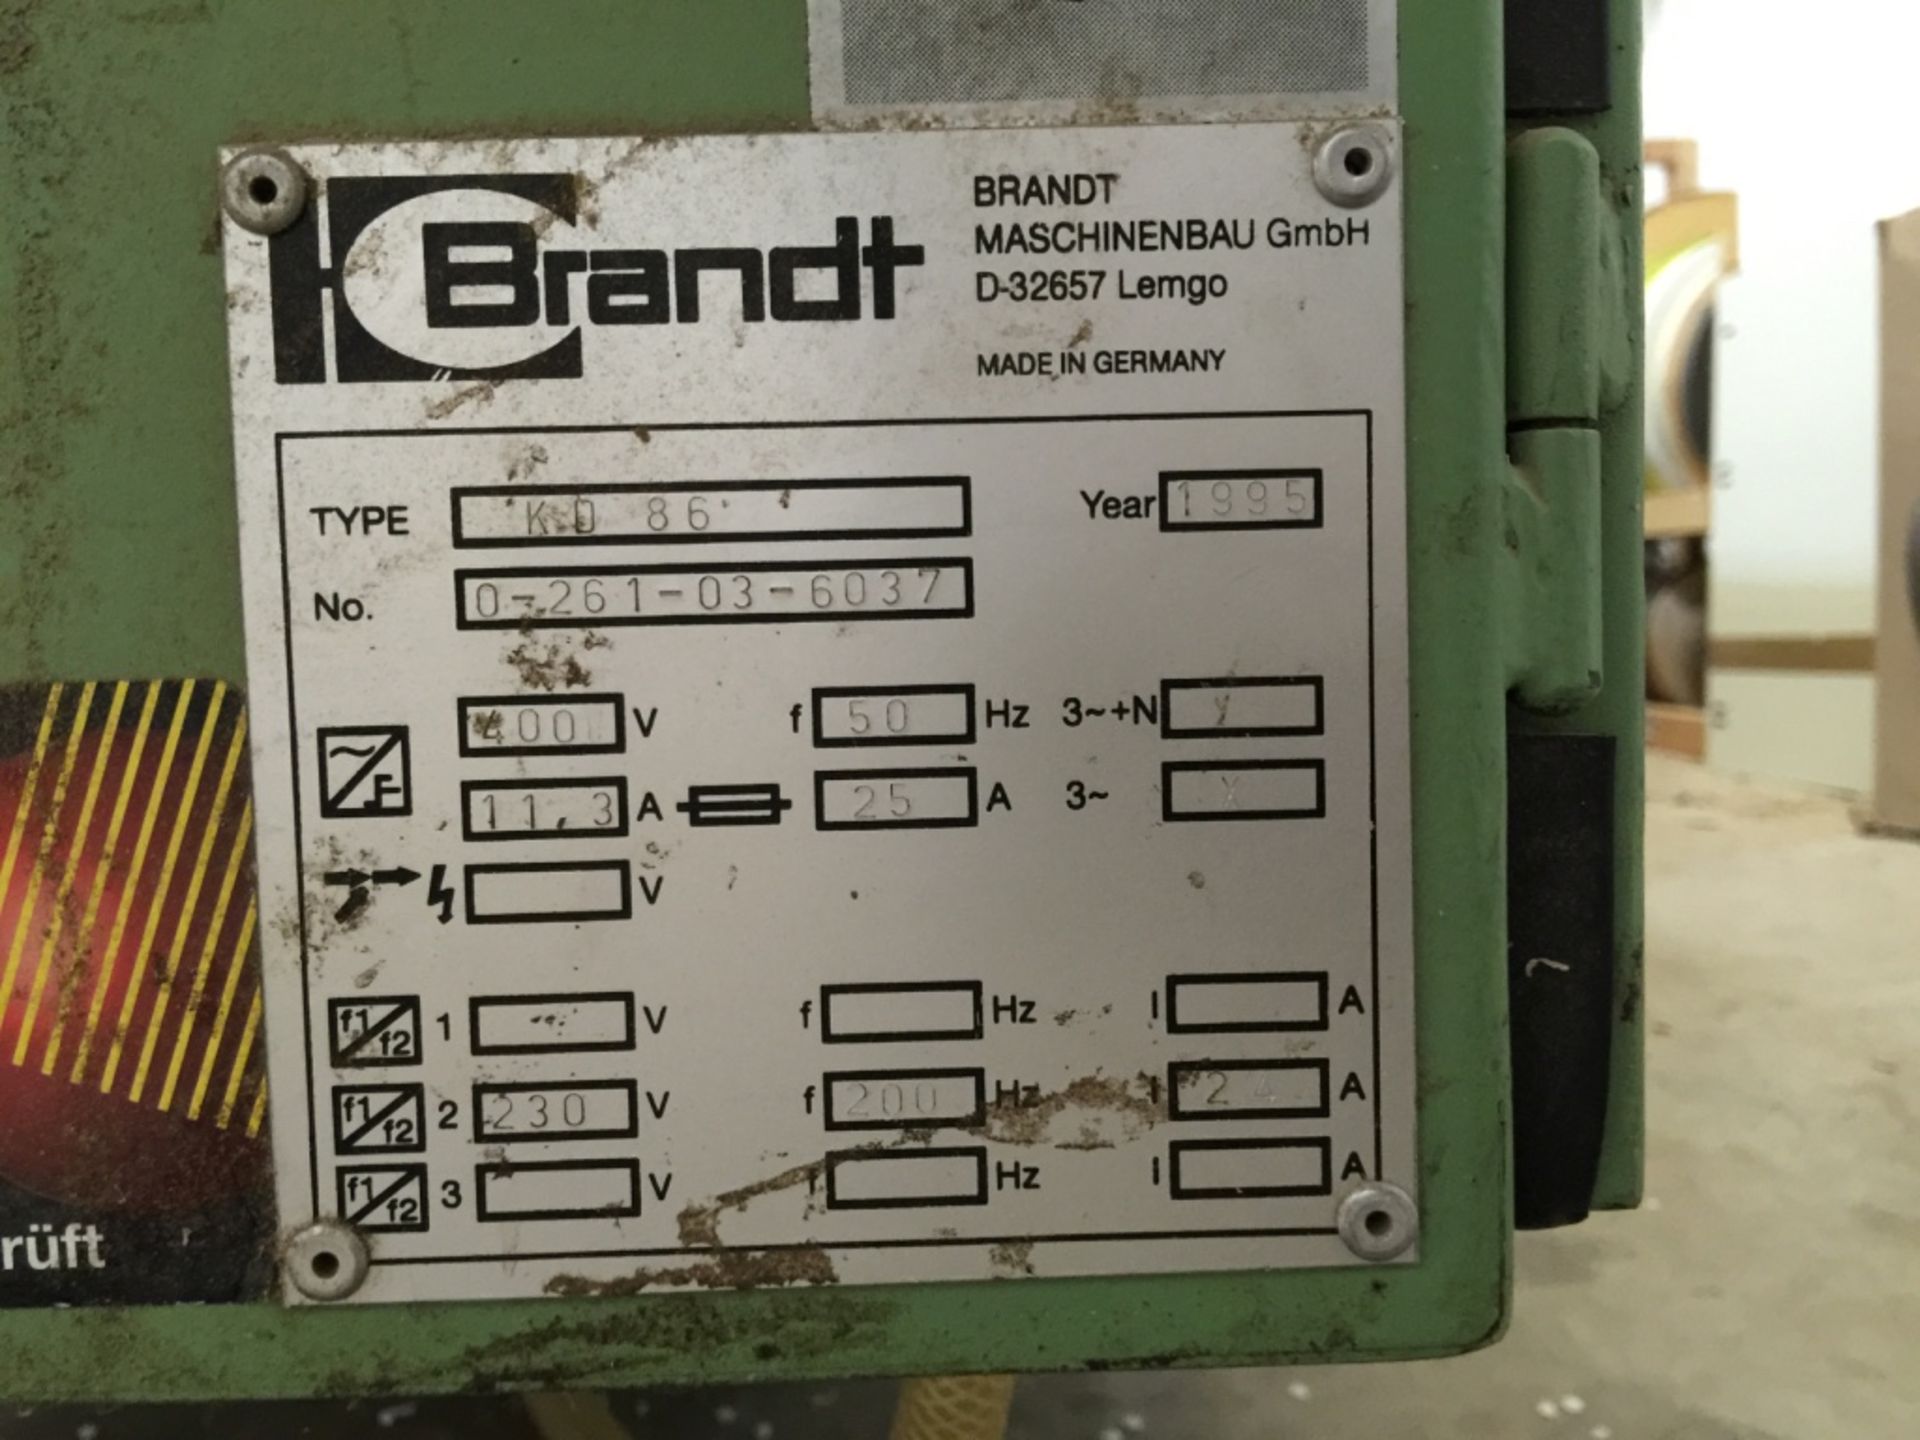 Brandt KD86 Edge Banding Machine with Stork-Tronic - Image 20 of 24